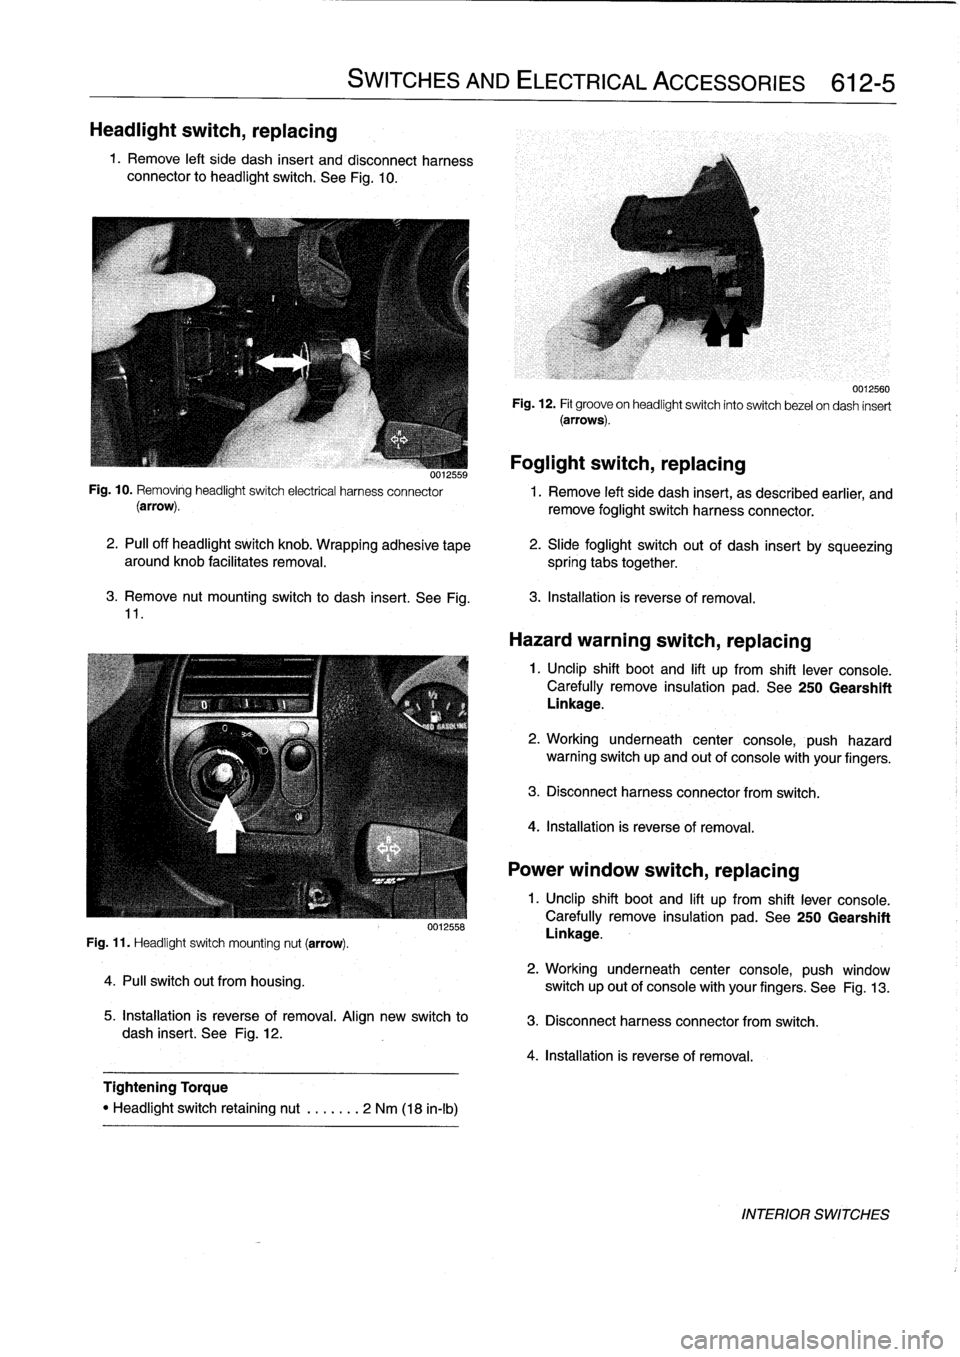 BMW 318i 1998 E36 Owners Manual 
Headlight
switch,
replacing

1
.
Remove
left
side
dash
insert
and
disconnect
harness
connector
to
headlight
switch
.
See
Fig
.
10
.

3
.
Remove
nut
mounting
switch
to
dash
insert
.
See
Fig
.
11
.

Fi